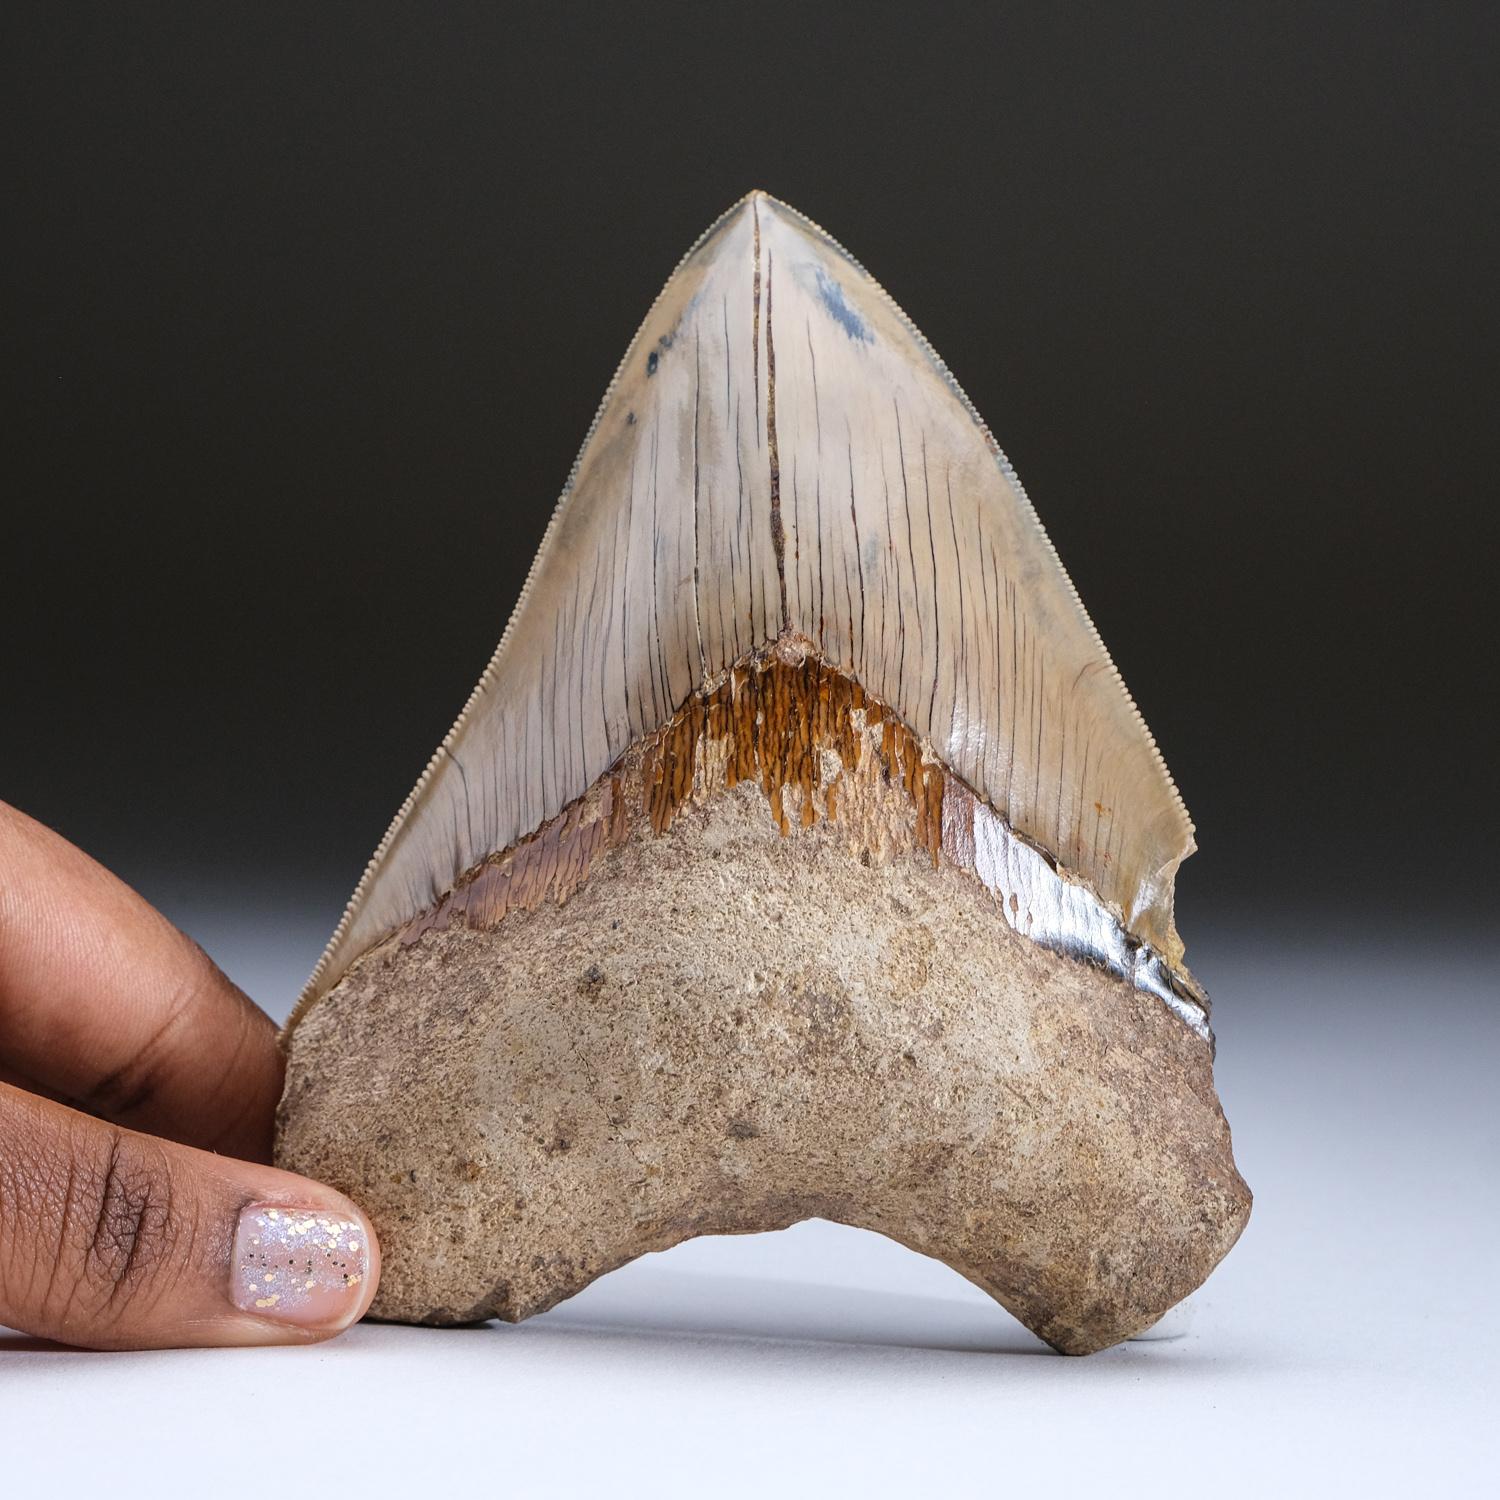 Megalodon was a prehistoric shark that may have been 50 feet long or more, two or three times as long as the Great White Shark! Just like modern sharks, this prehistoric predator did not have any bones to leave in the fossil record, except for their